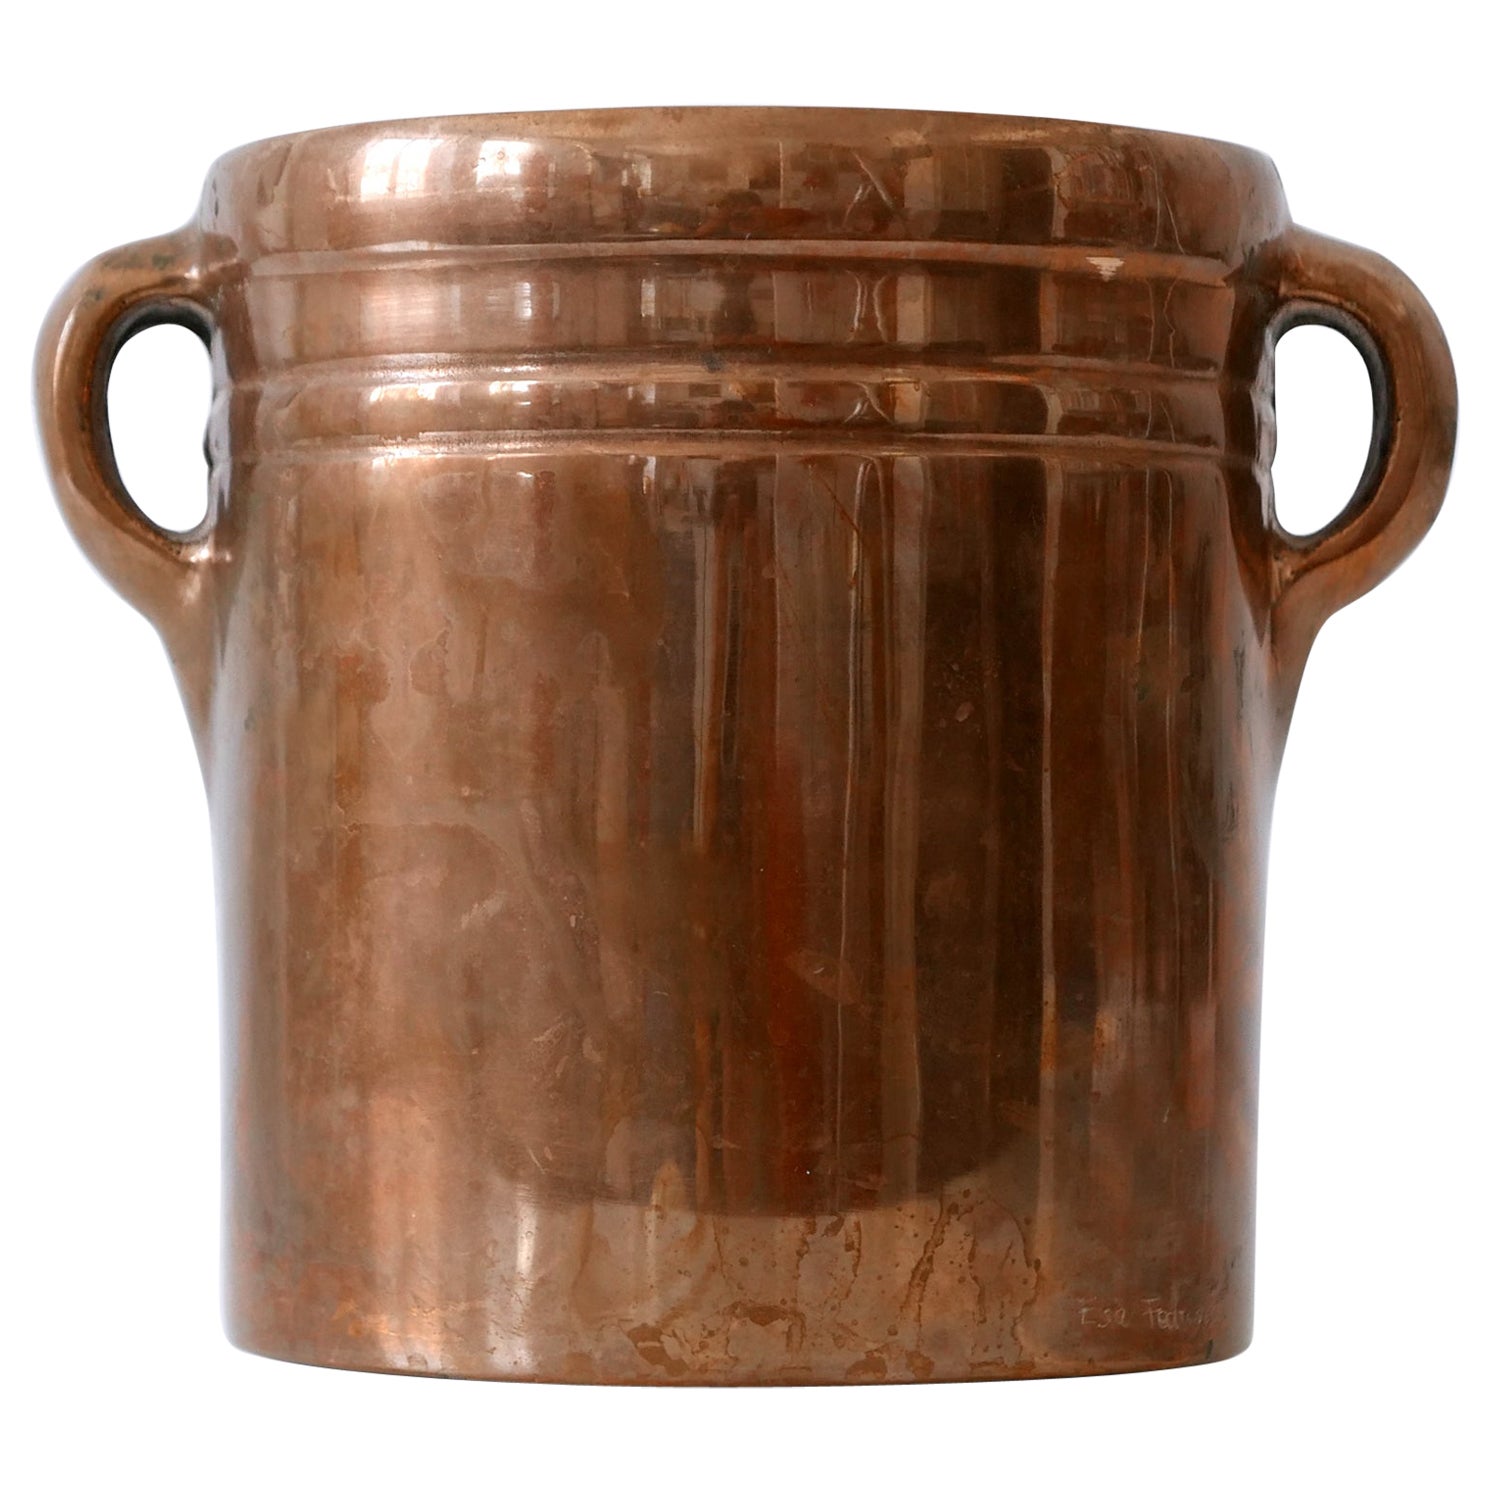 Exceptional Bronze Champagne Cooler or Ice Bucket by Esa Fedrigolli for Esart